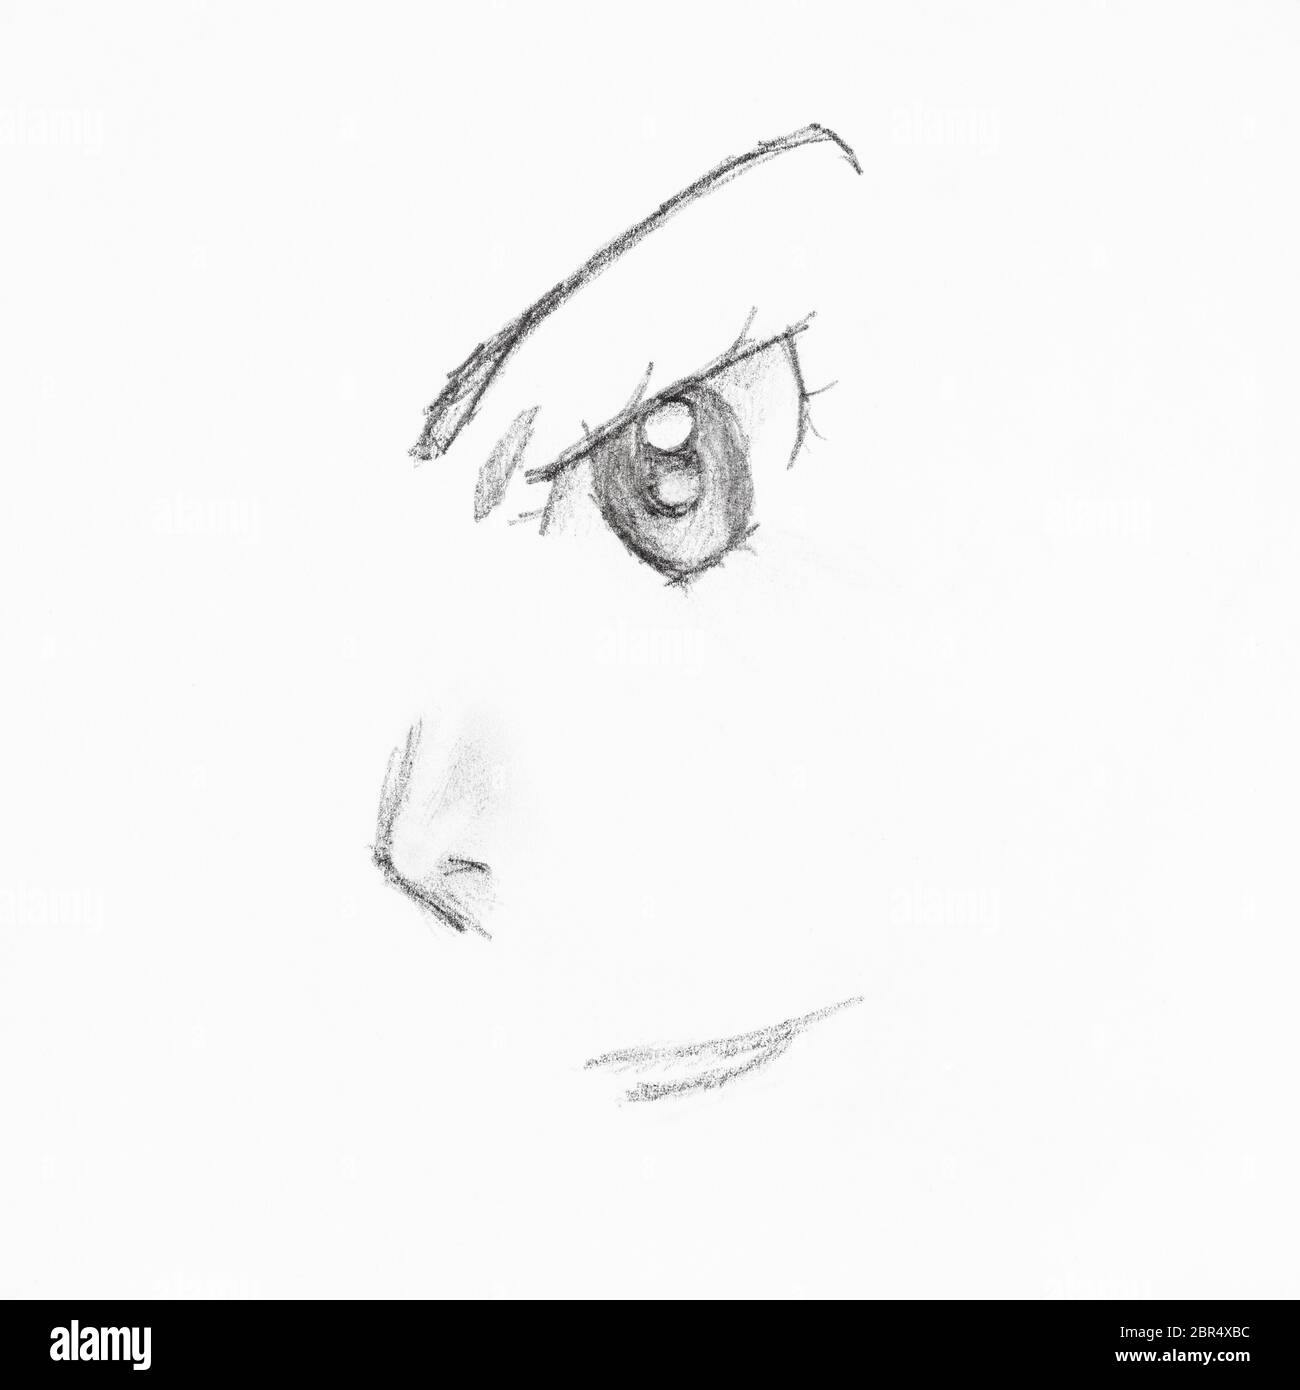 How to Draw the front view structure of a face in anime « Drawing &  Illustration :: WonderHowTo